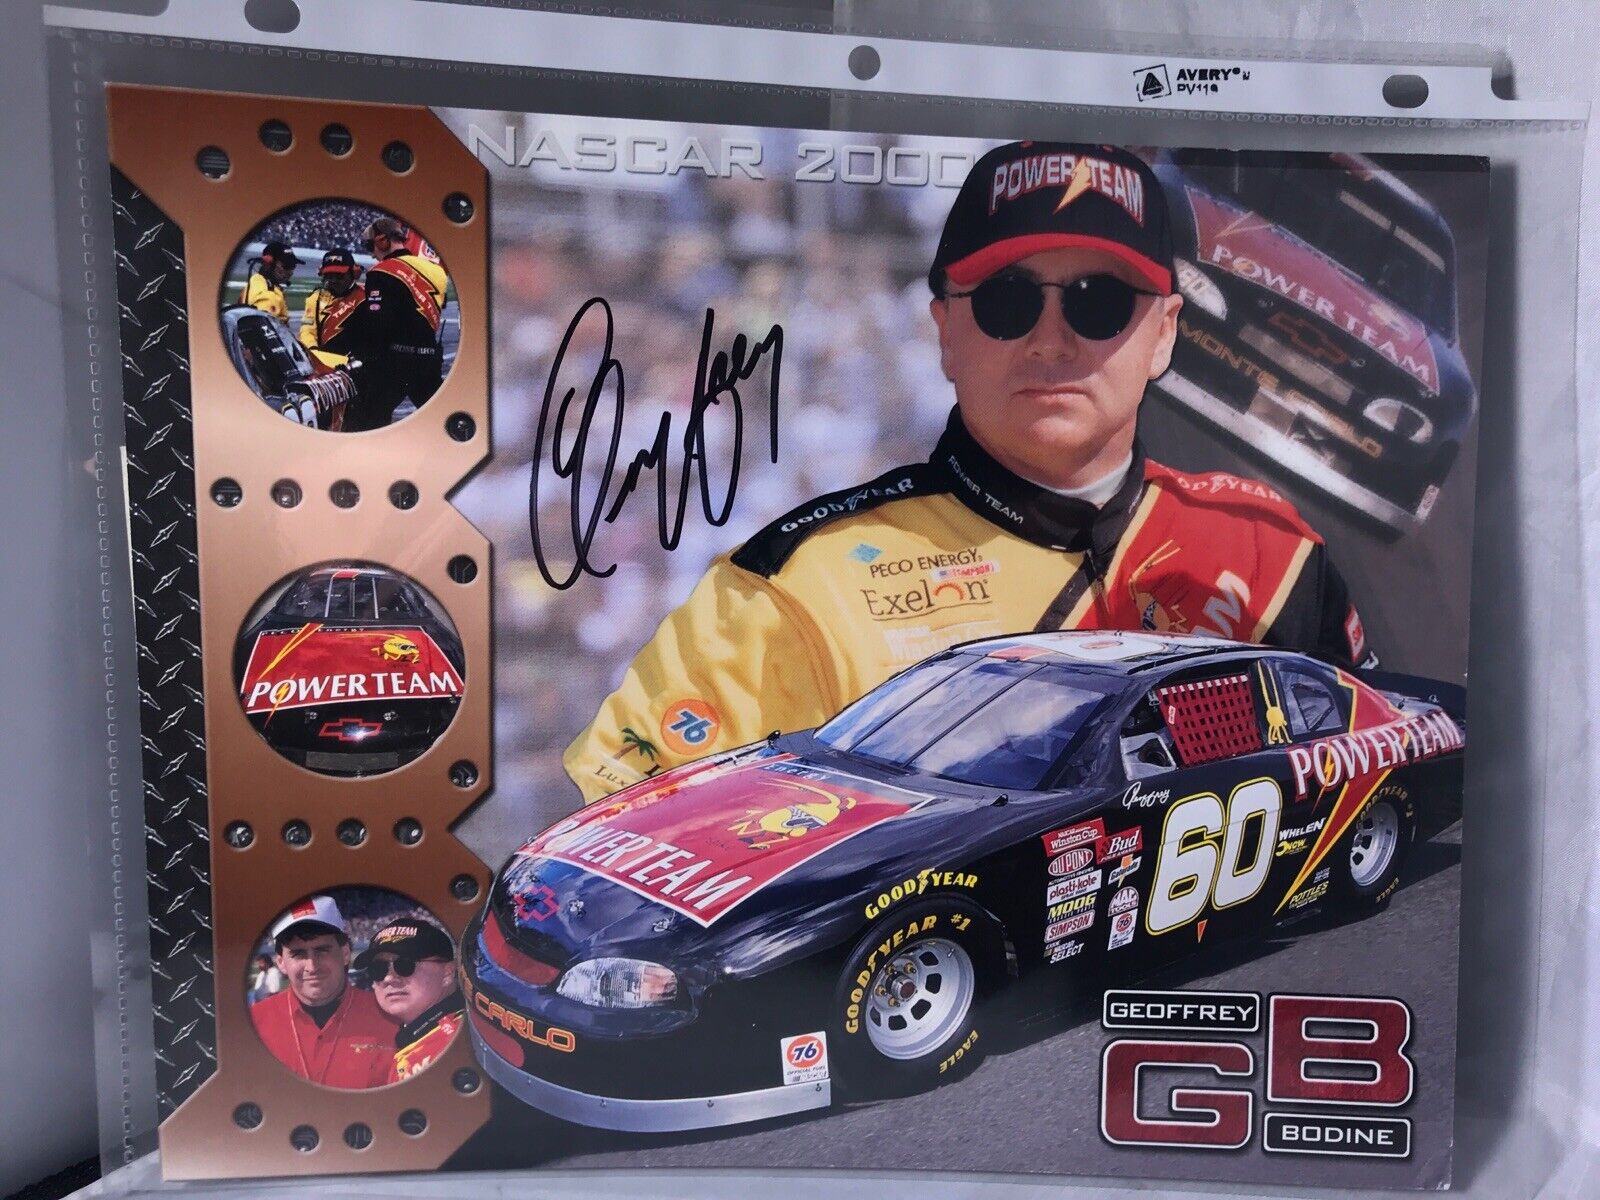 Geoffrey Bodine Signed Autographed 8x10 Promo Max 87% OFF Nascar Raci Truck In a popularity